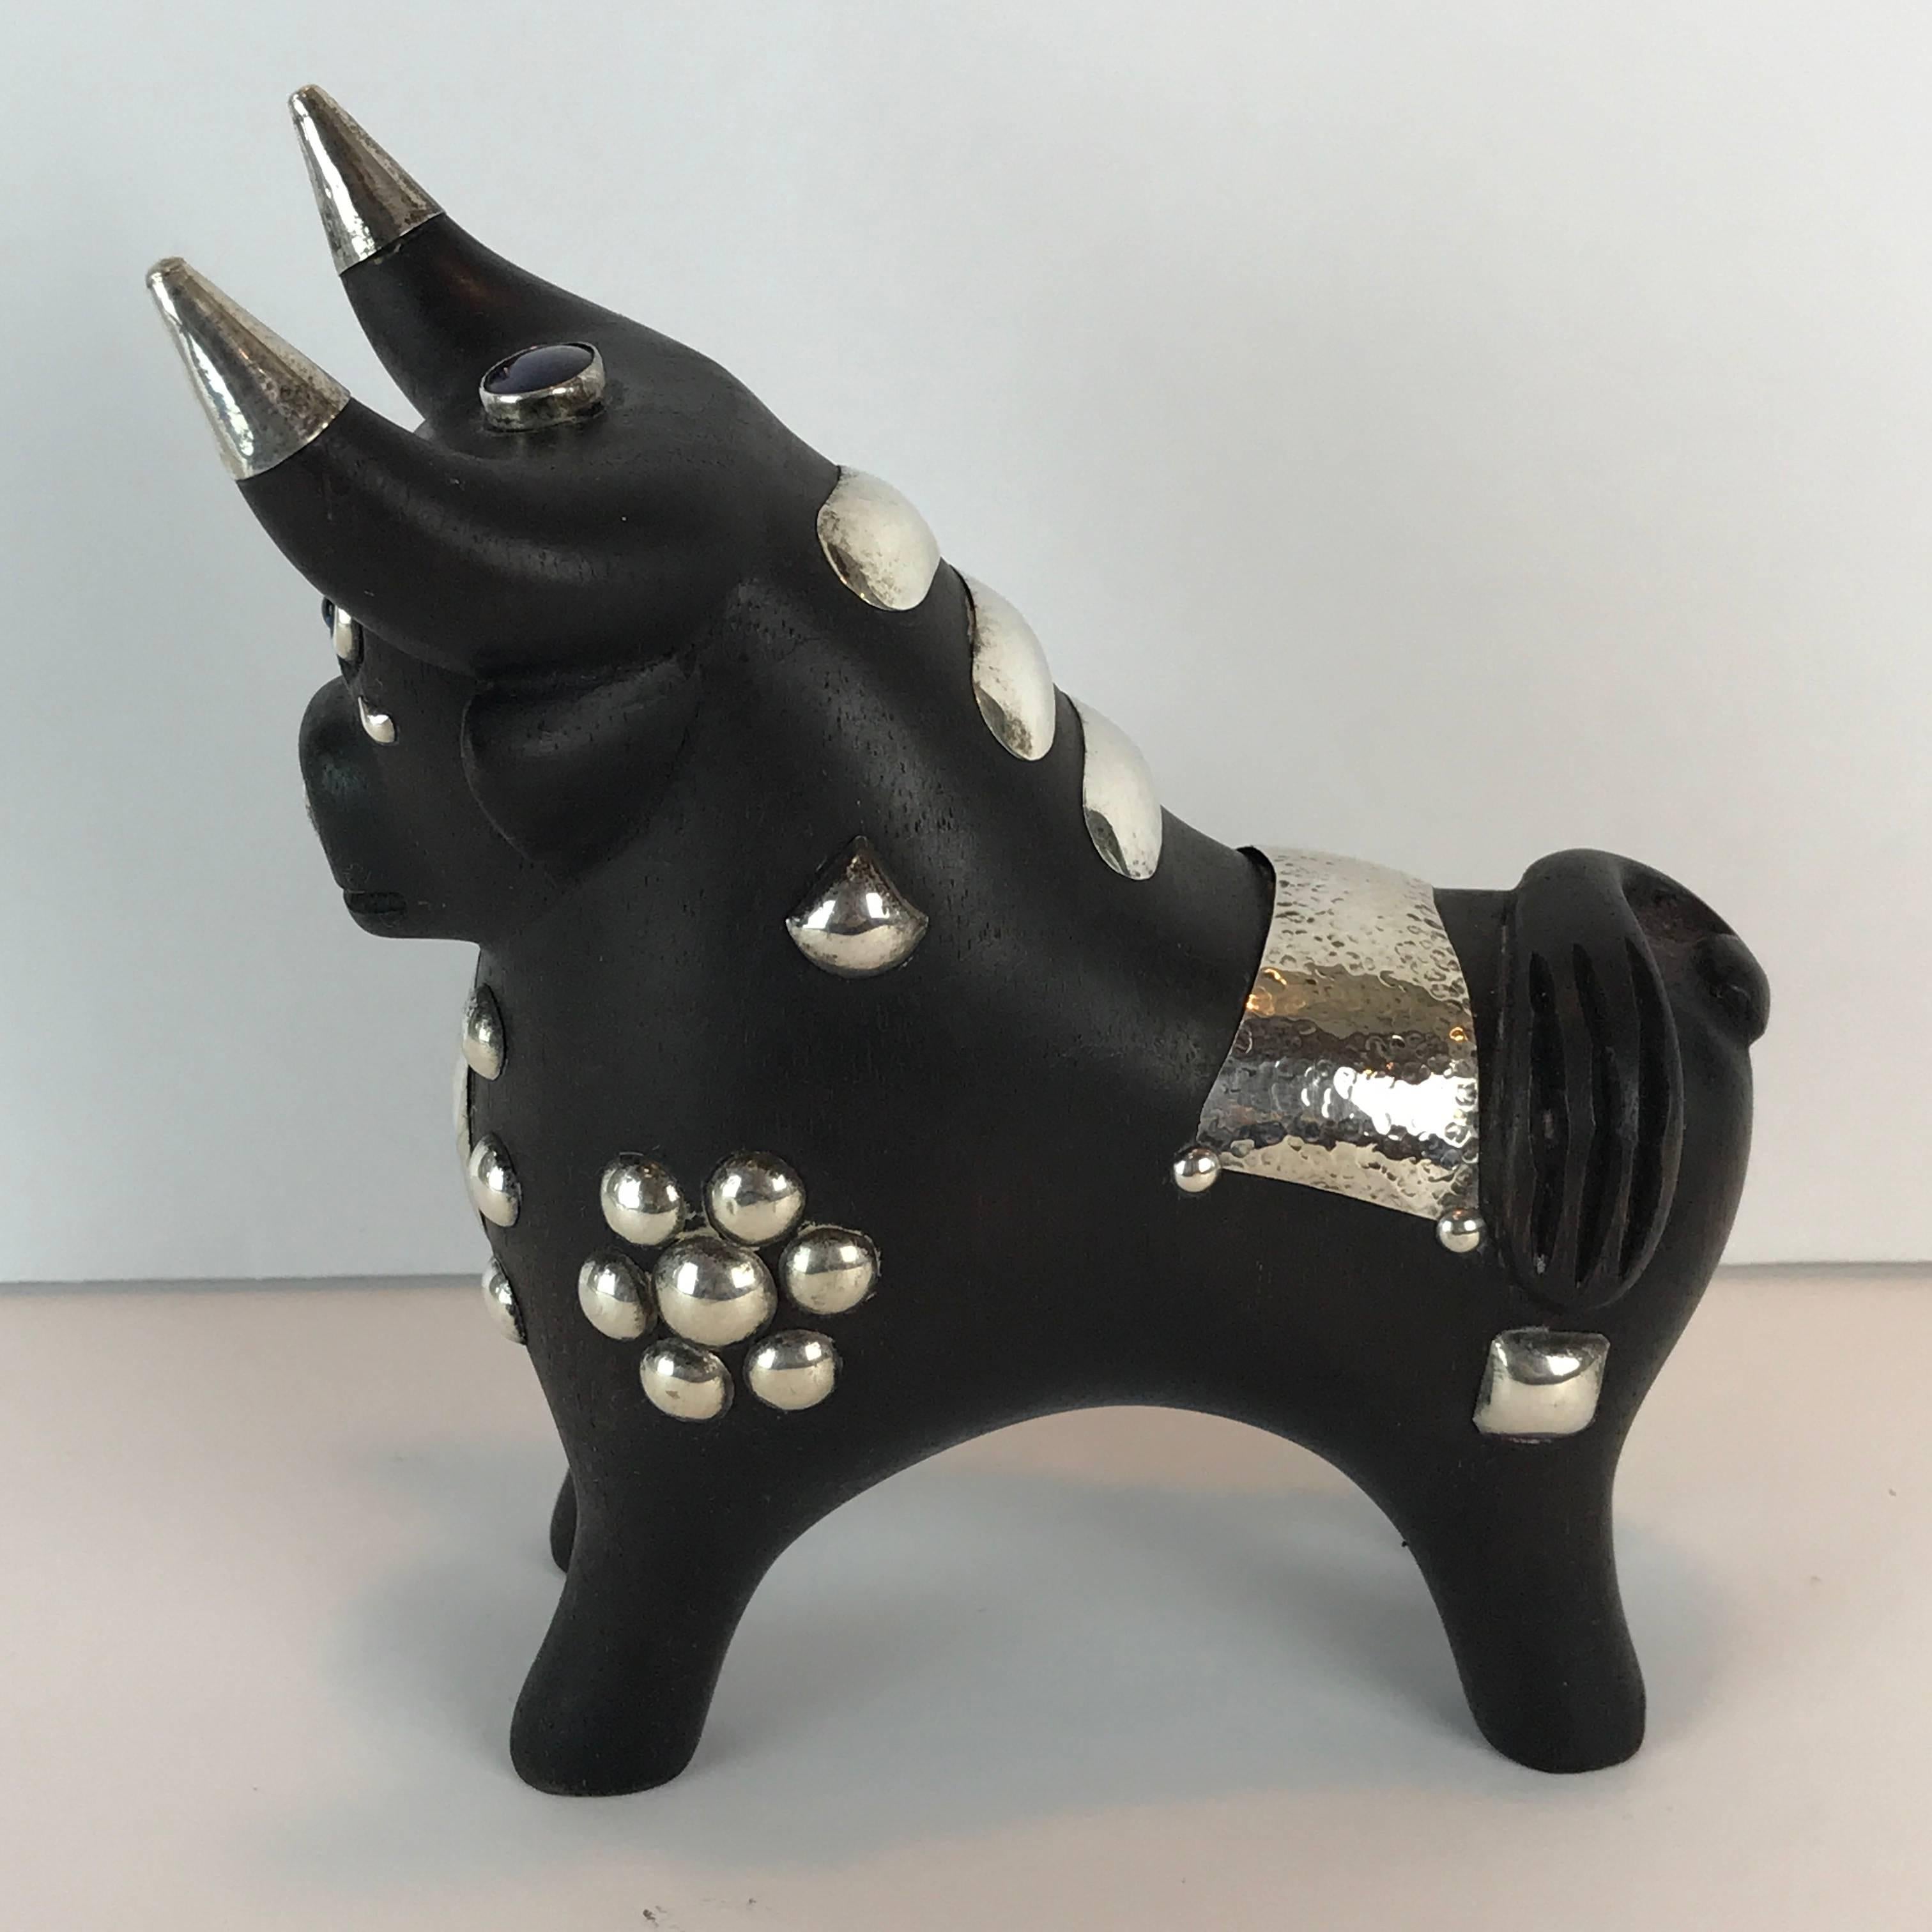 Midcentury Carved Wood and Silver Taurus Bull Sculpture For Sale 2